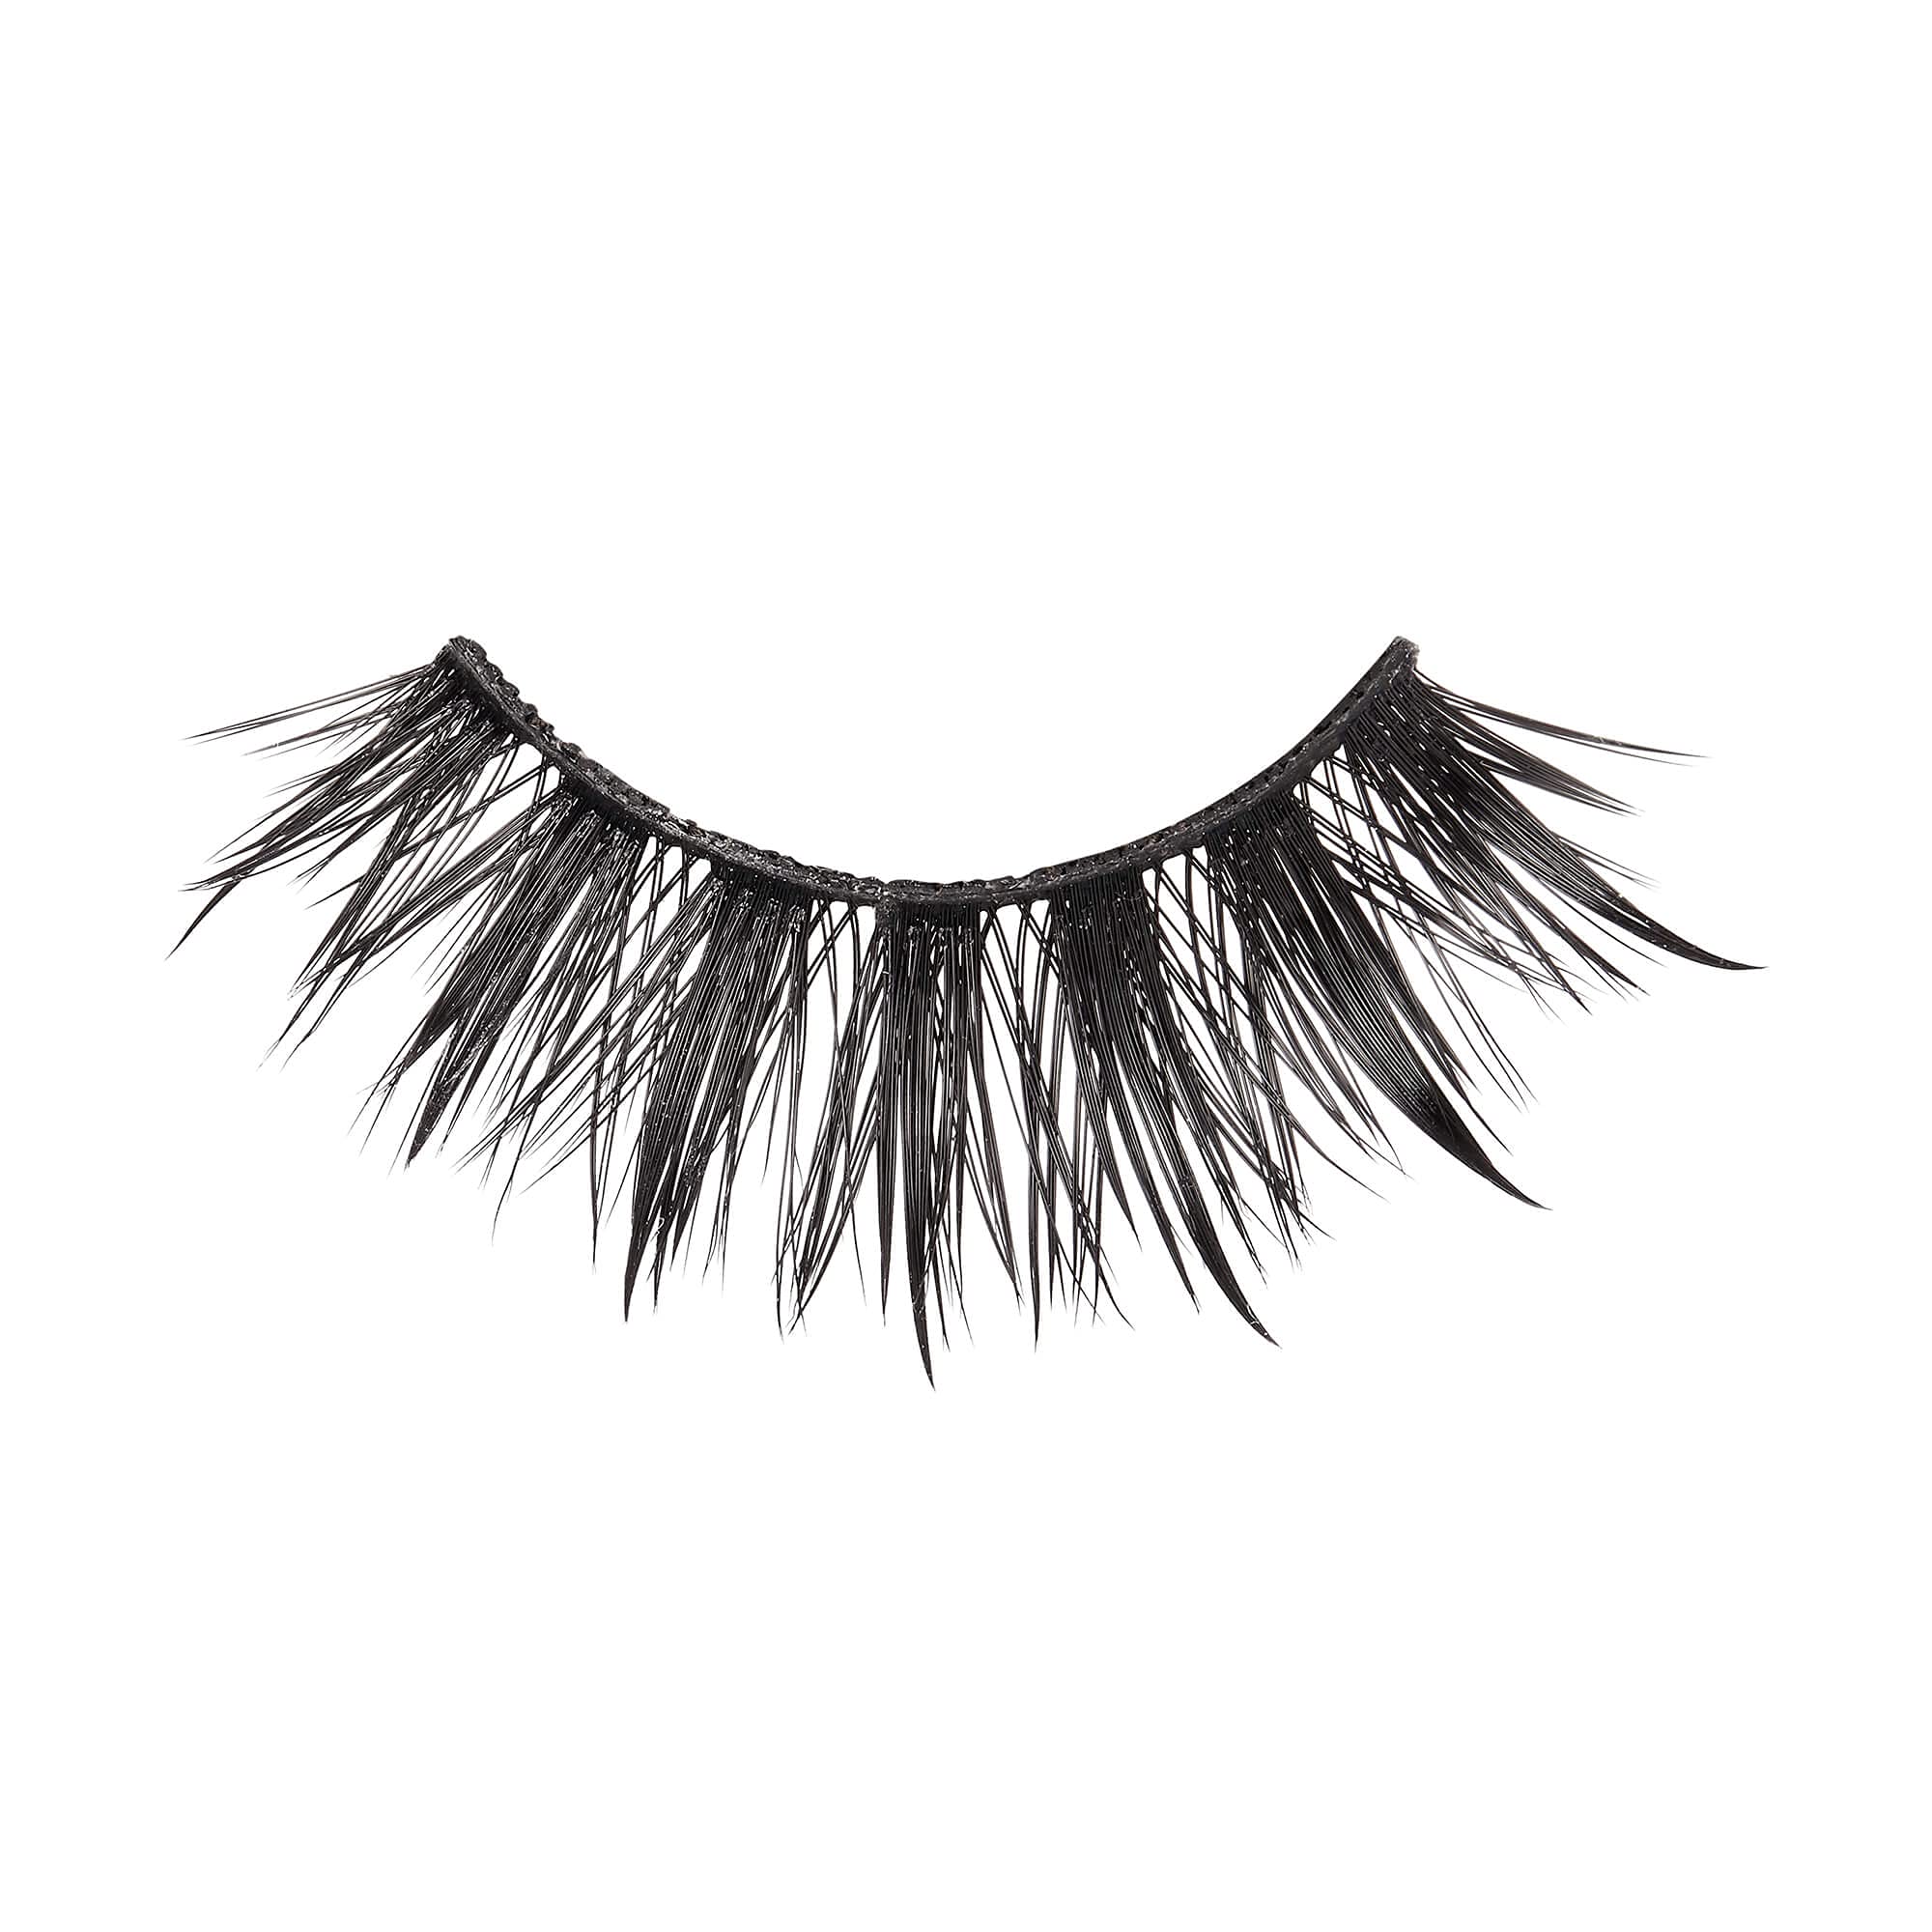 KISS Lash Drip False Eyelashes, Spiky X Boosted Volume, Unique Wet Look Hydrated Effect, Multi-Length Rewearable Fake Eyelashes, Wispy Crisscross Lash Pattern, Style ‘Drenched’, 1 Pair